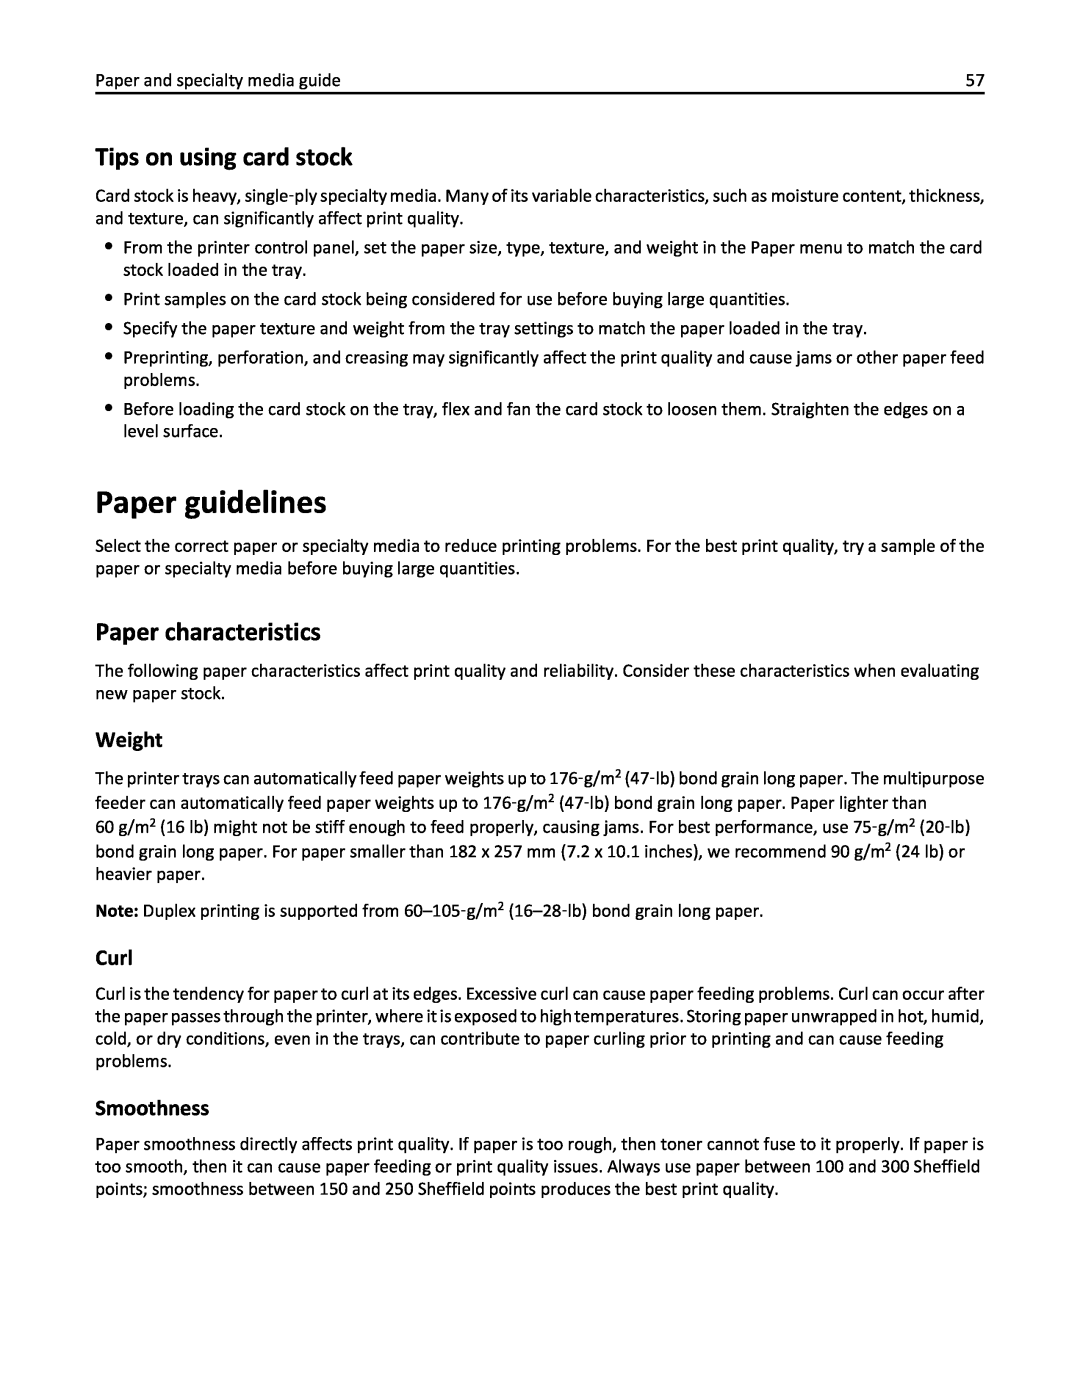 Lexmark 436 manual Paper guidelines, Tips on using card stock, Paper characteristics, Weight, Curl, Smoothness 